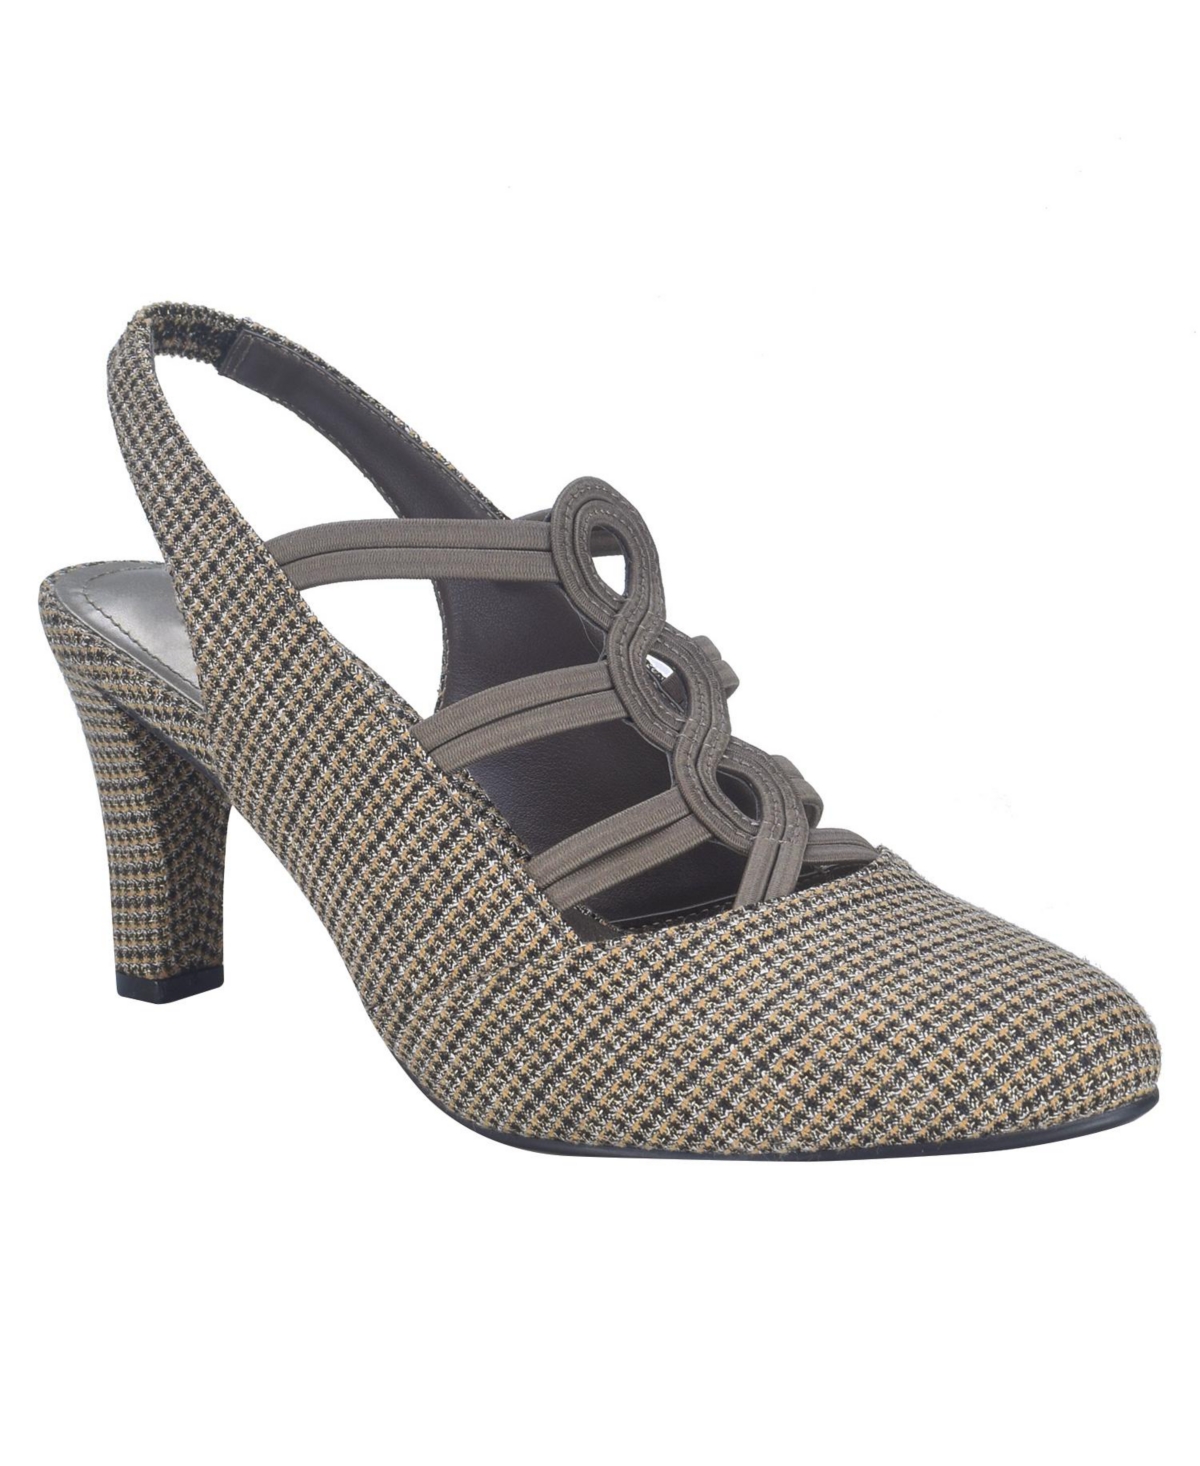 Women's Velia Stretch Elastic Sling-Back Pump with Memory Foam - Fossil Taupe-Fabric, Elastic